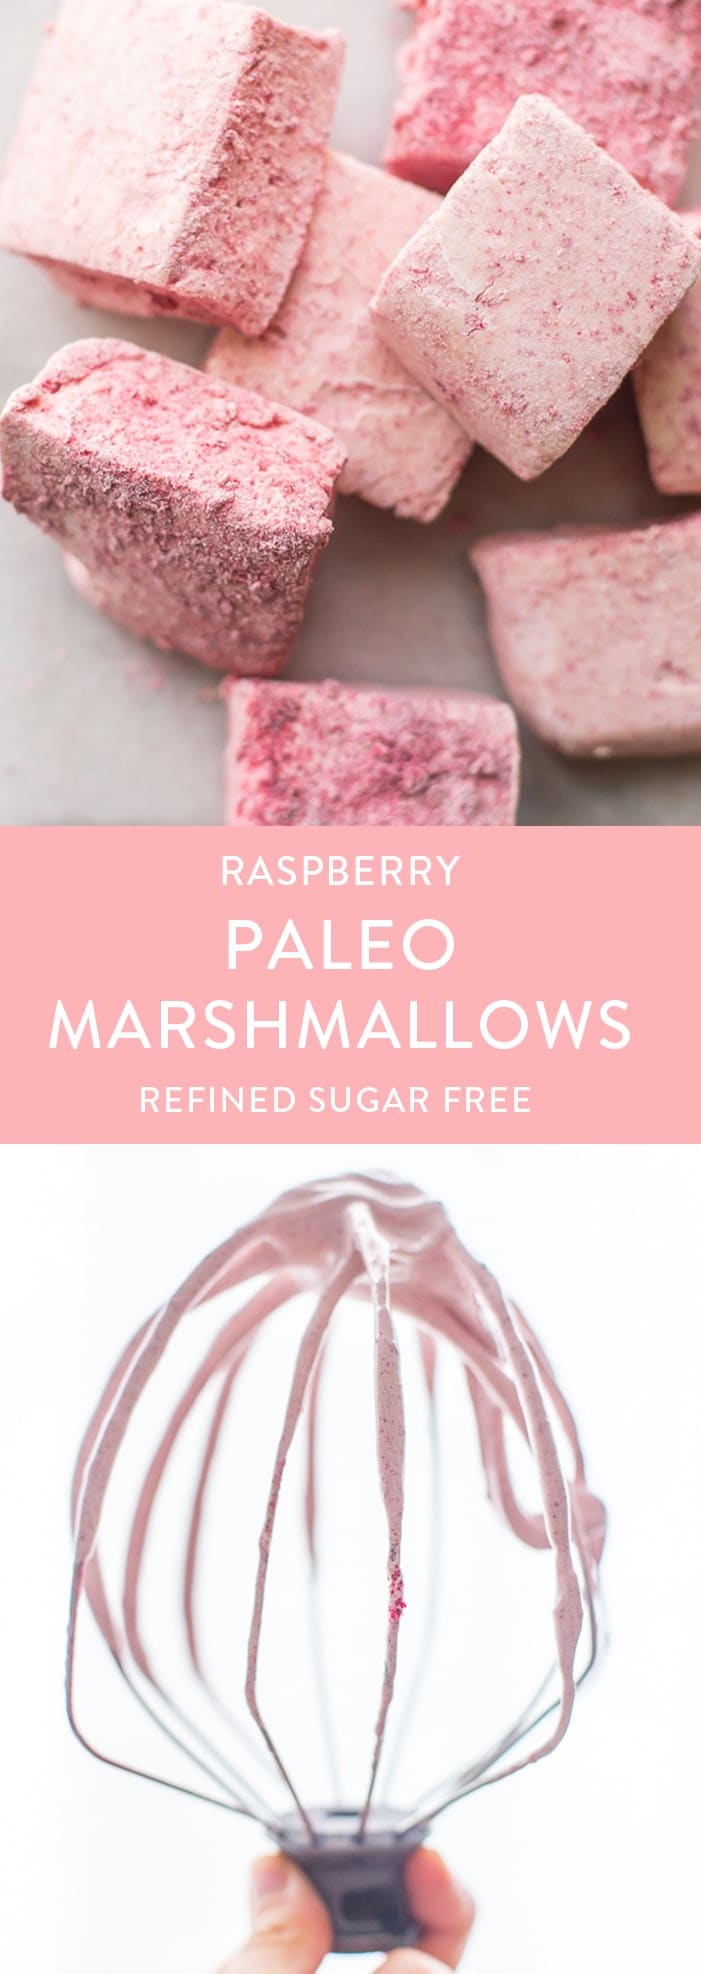 Raspberry paleo marshmallows and toasted coconut lemon paleo marshmallows are the perfect paleo treat. Light and fluffy and made from only healthy ingredients? YAS queen